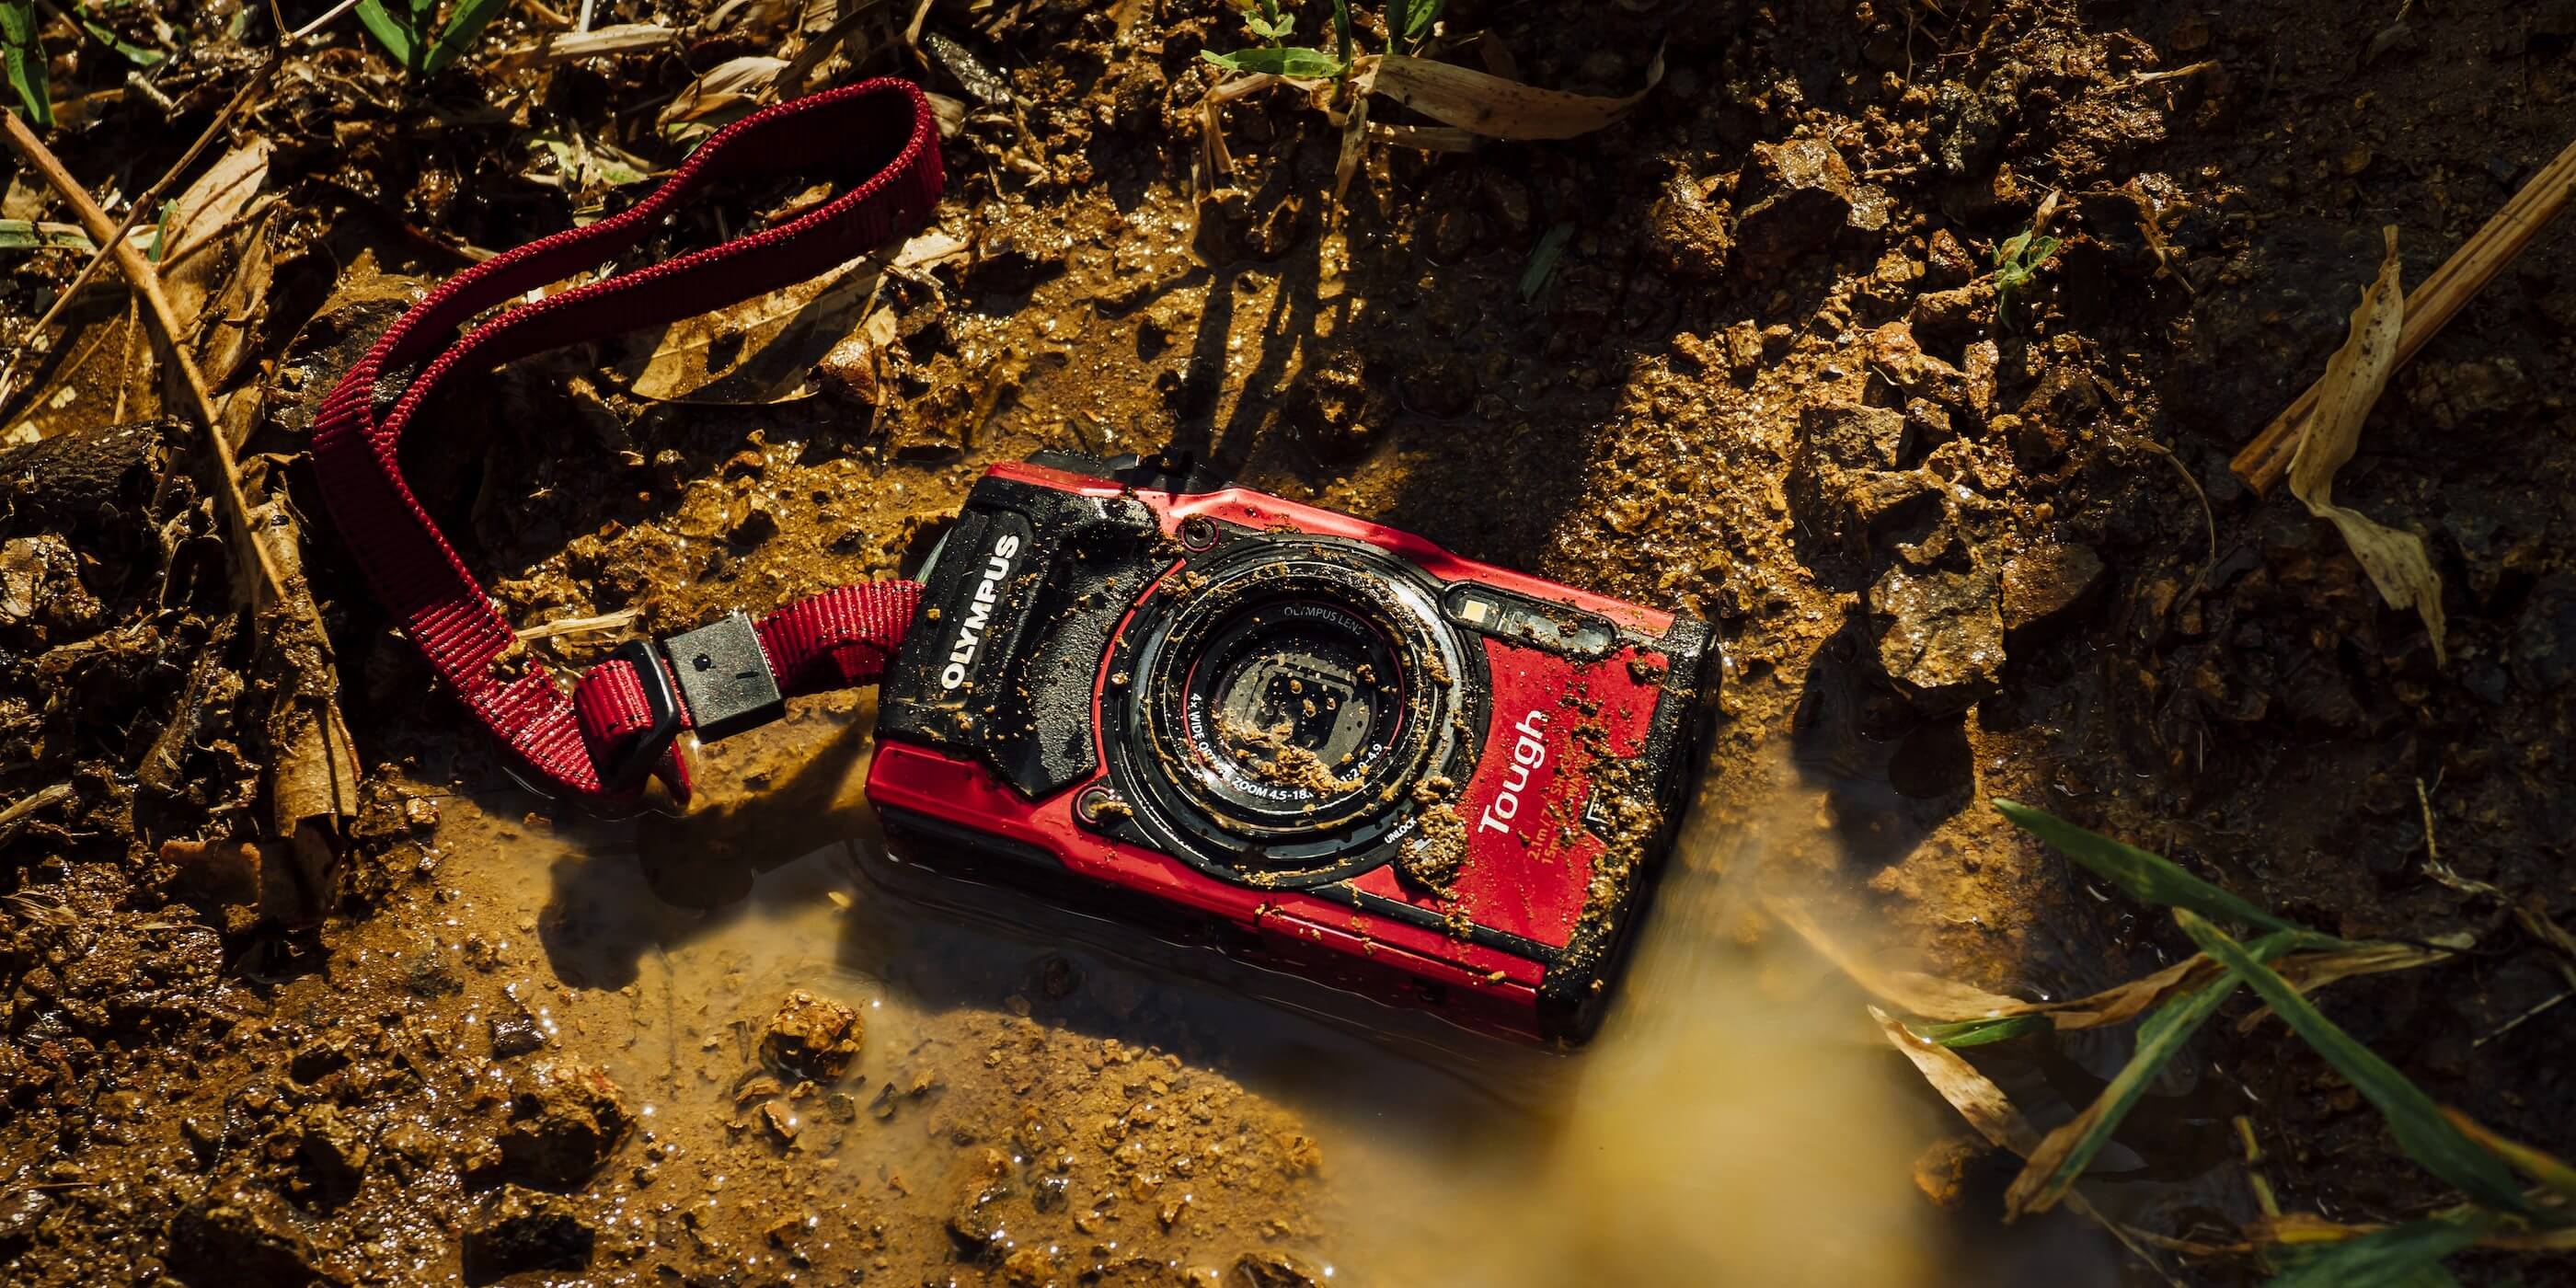 This image shows the Olympus Tough TG-5 waterproof camera on the ground in mud.